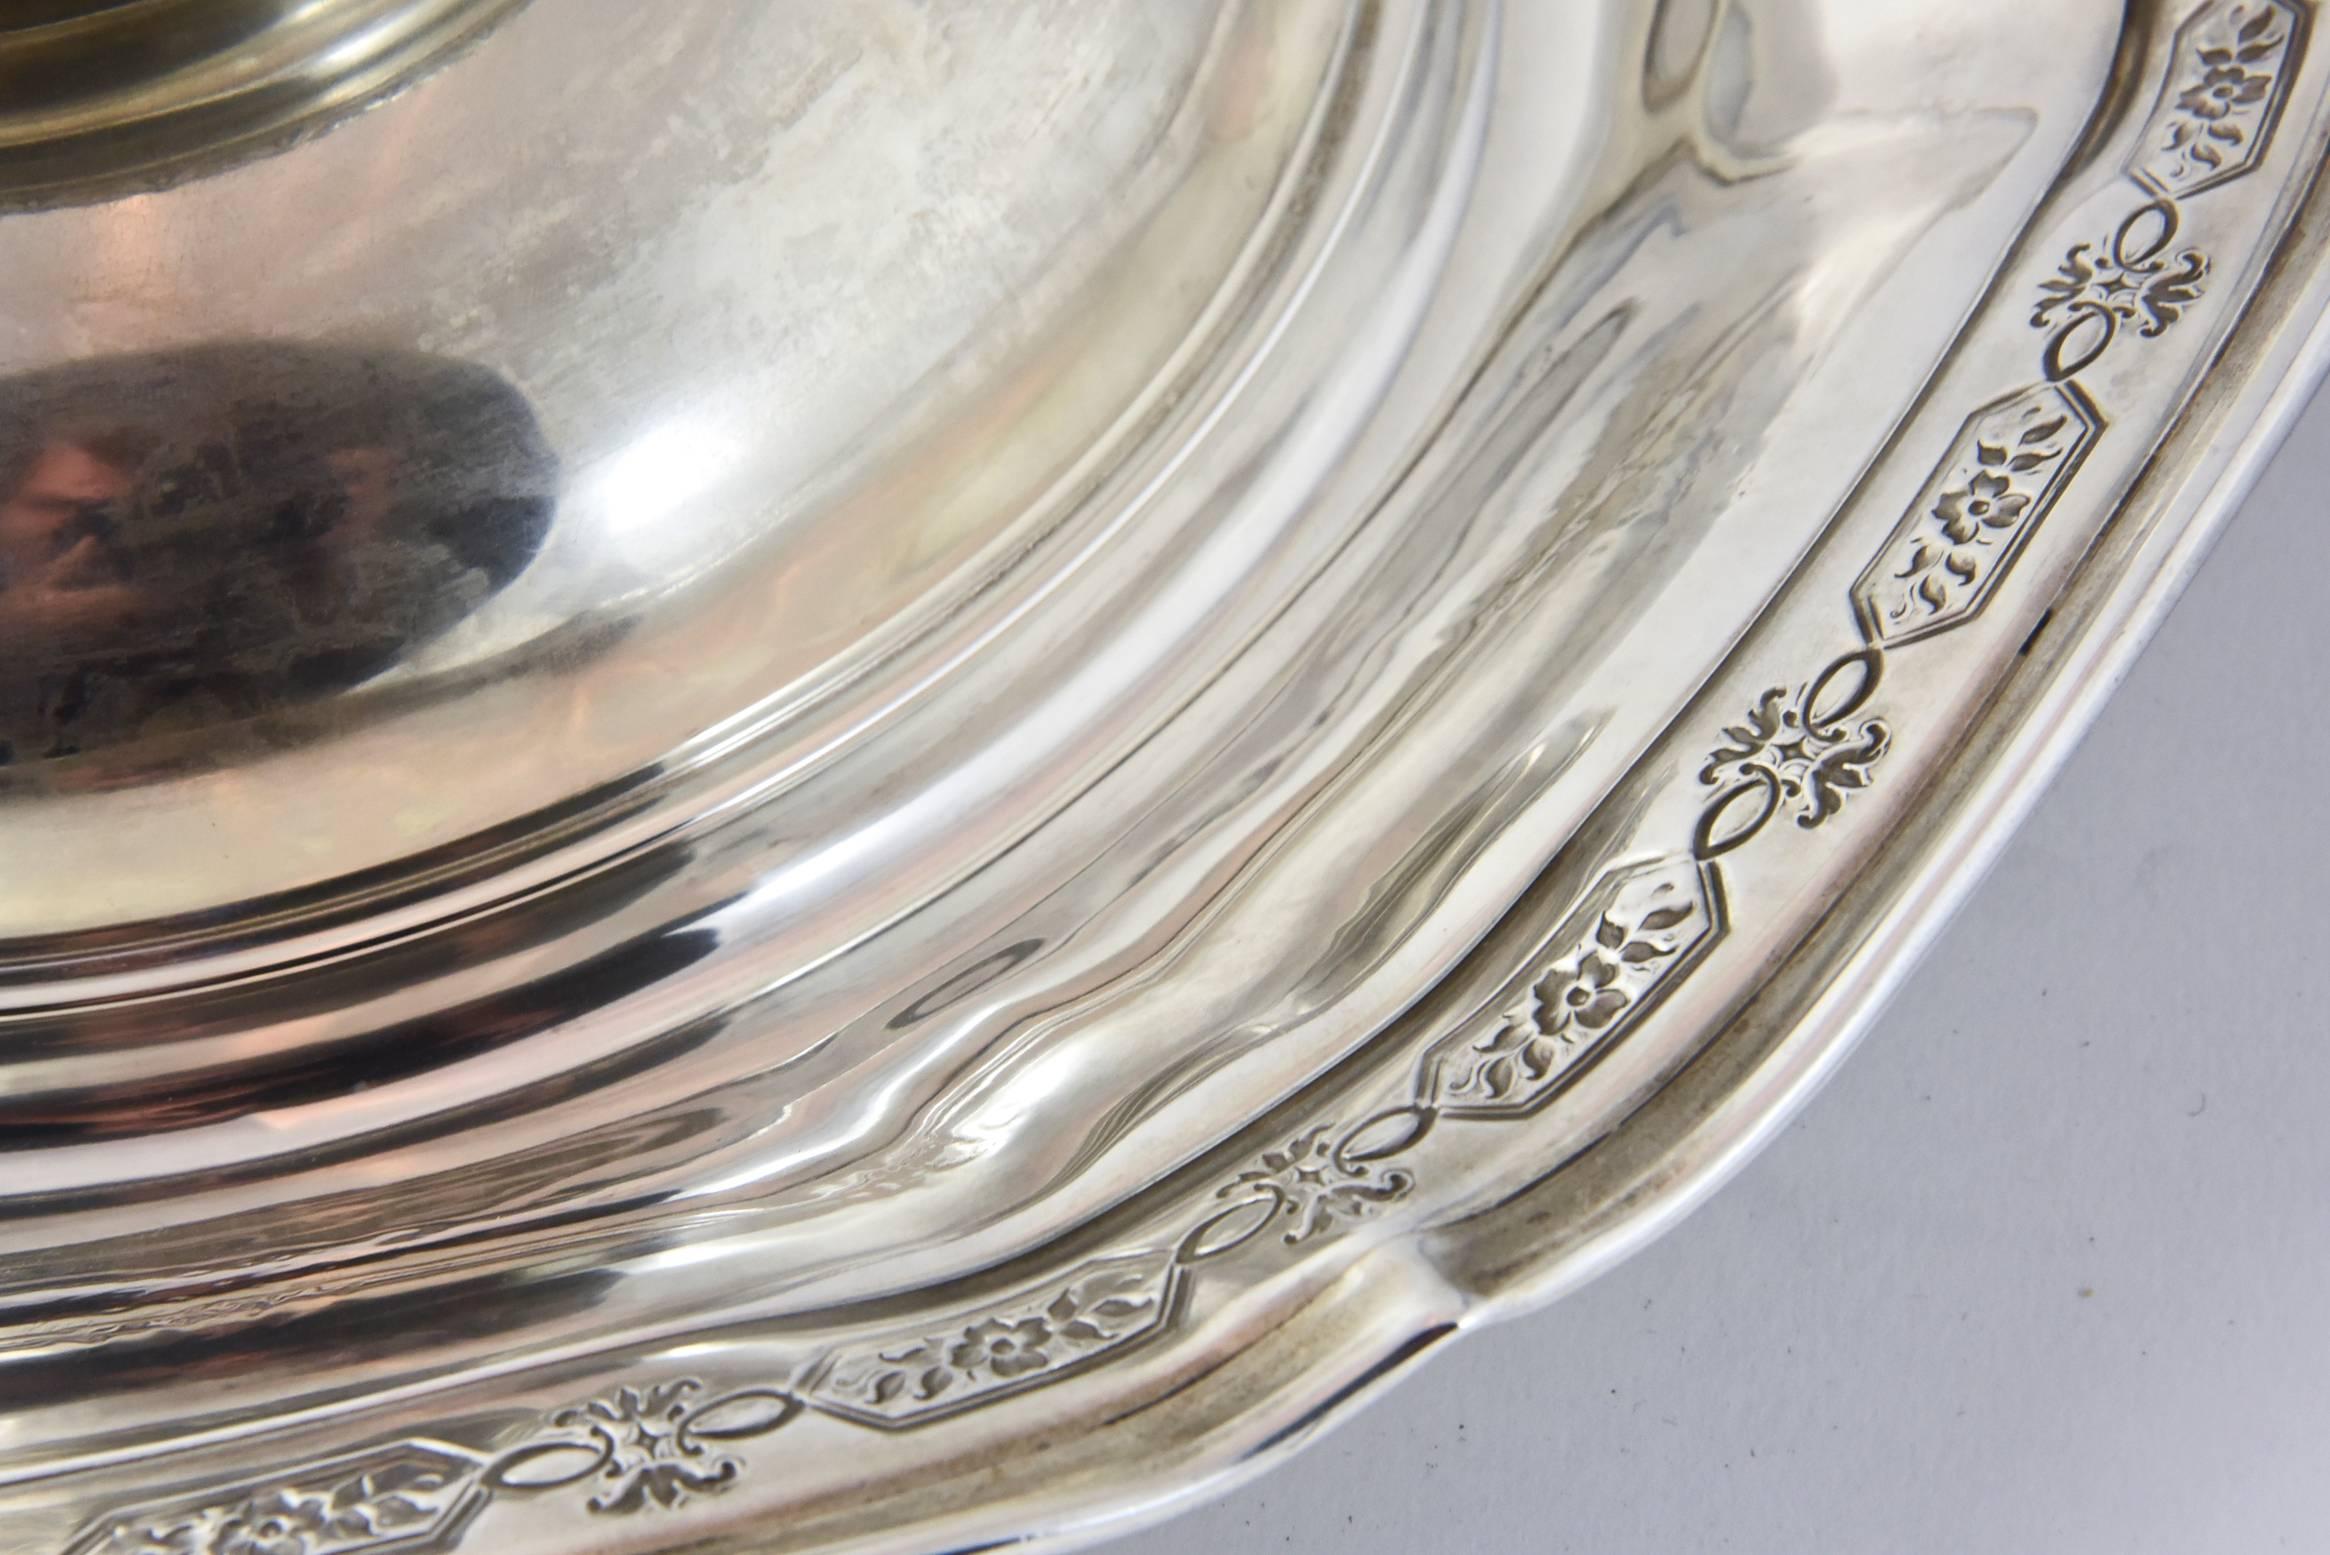 Metalwork Towle Louis XIV Ornate Sterling Silver Flower Display Bowl with Pierced Frog